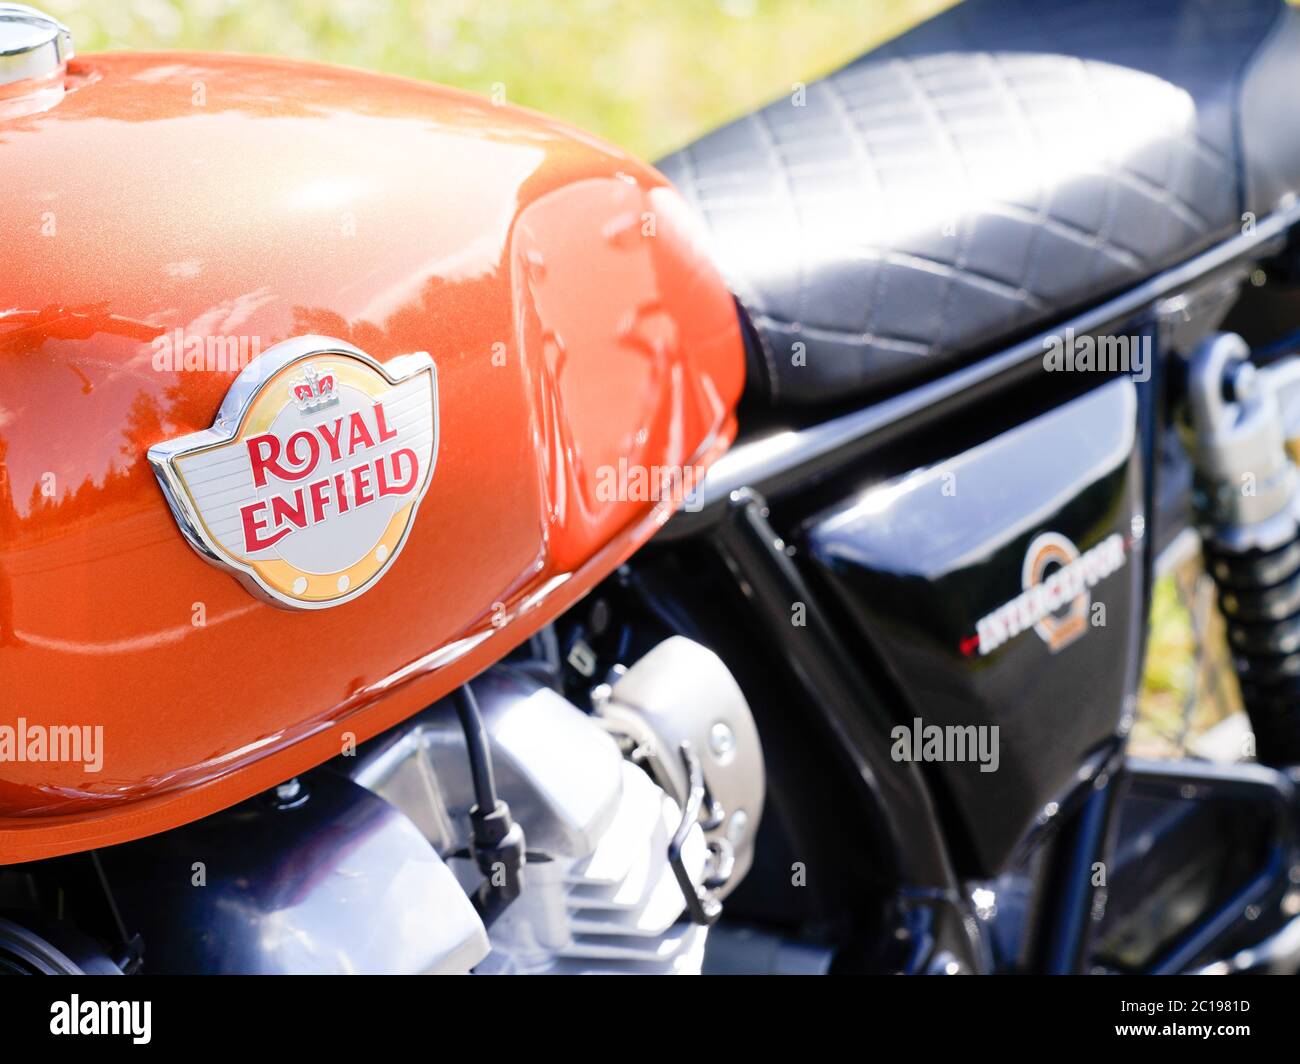 Bordeaux , Aquitaine / France - 06 01 2020 : Royal Enfield logo sign on tank motorcycle in orange color of vintage indian classic motorbike Stock Photo